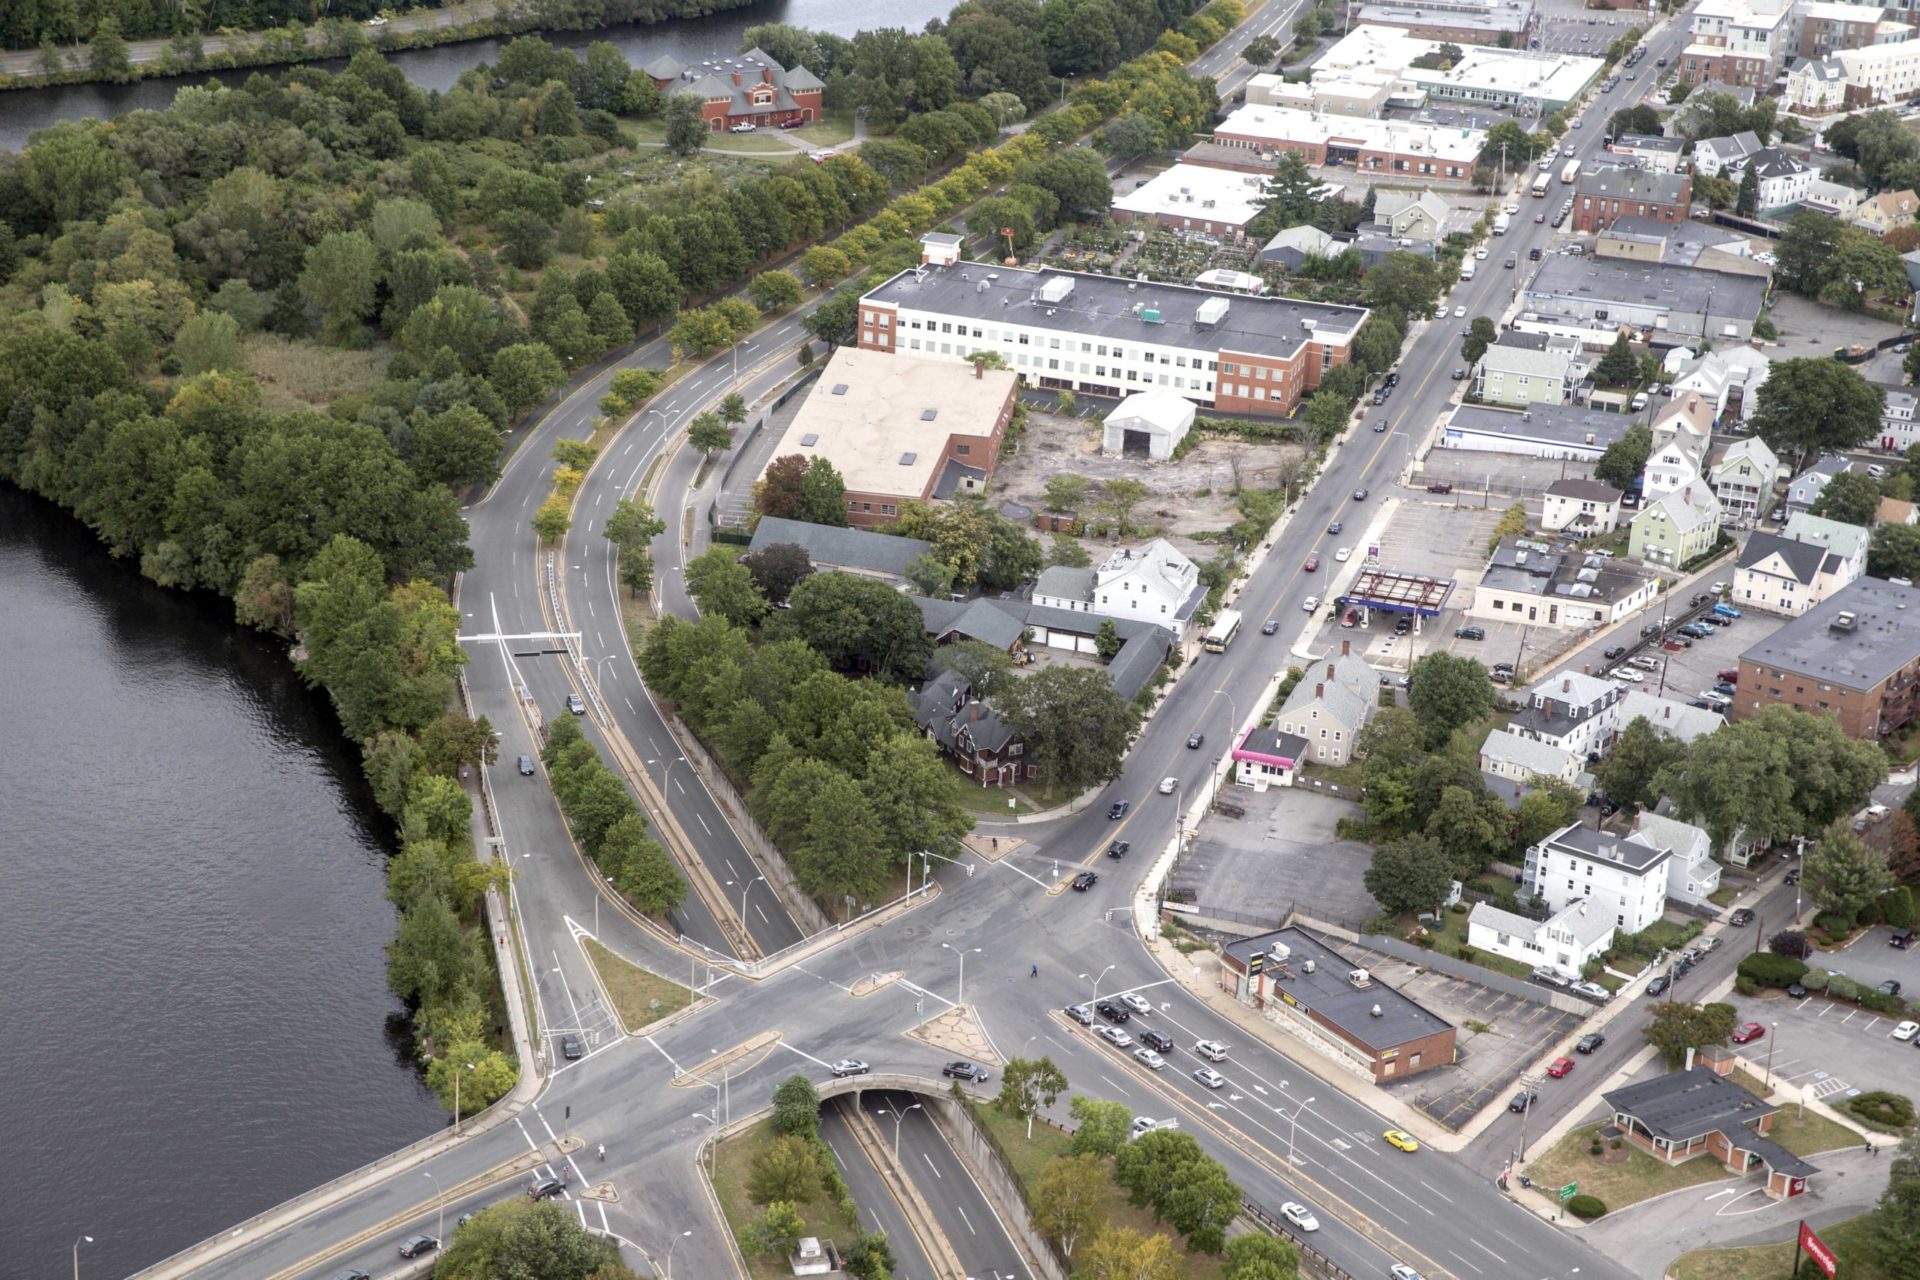 Aerial view of North Brighton and the Charles River Speedway, an adaptive reuse project led by the Architectural Heritage Foundation (AHF).